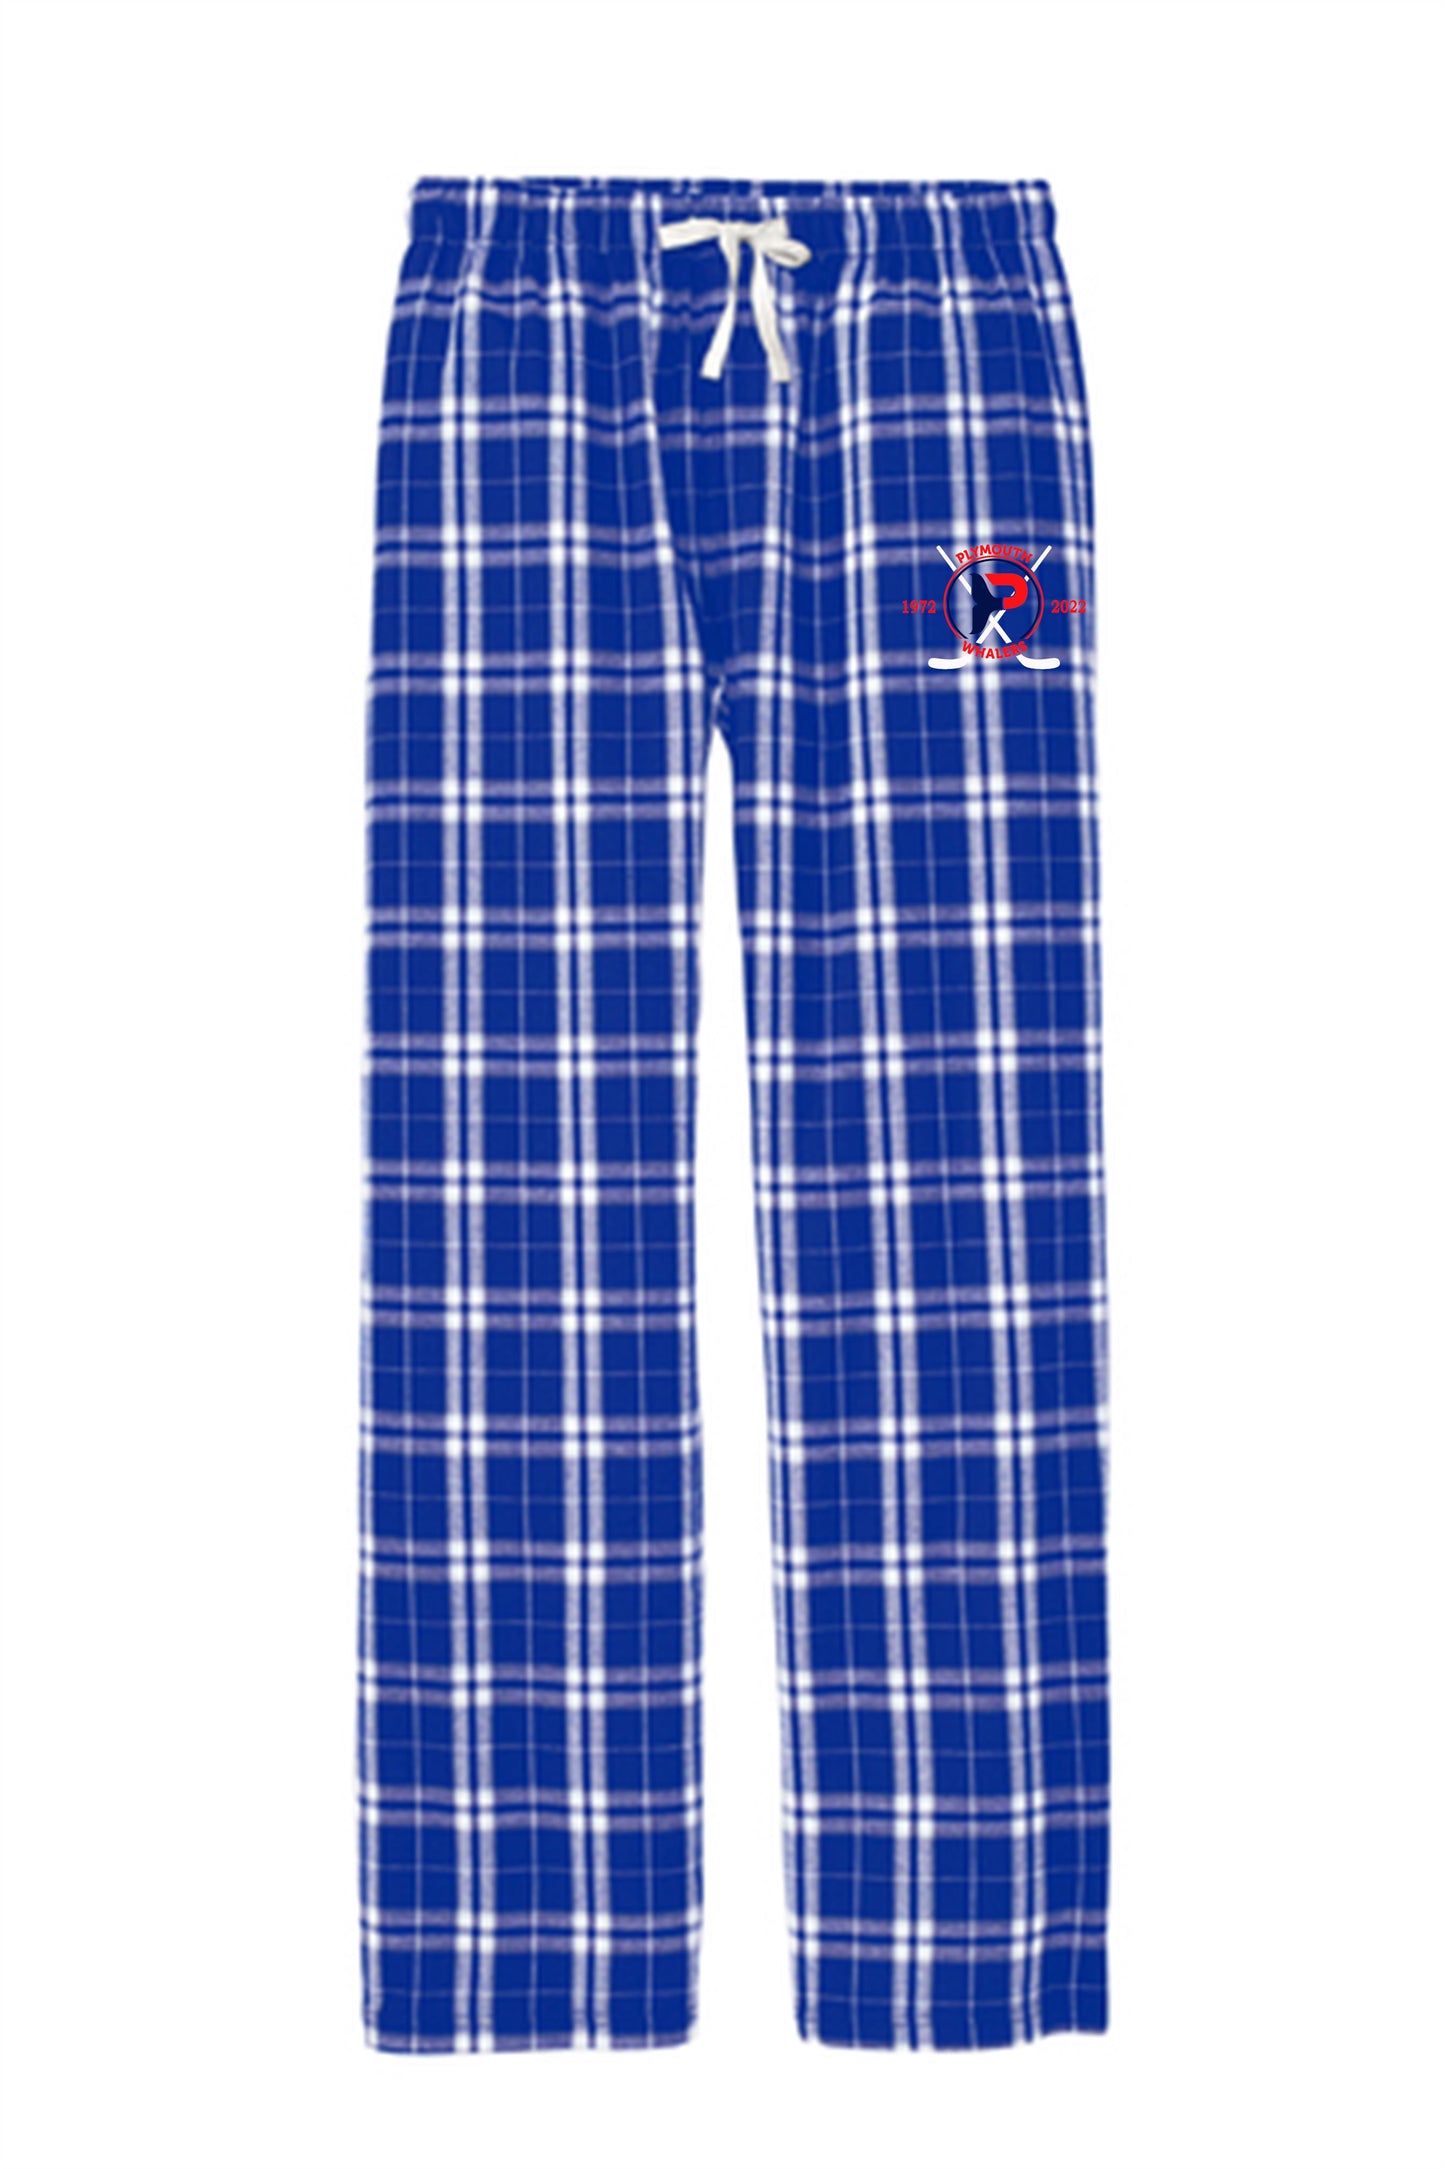 50th Anniversary Flannel Pants